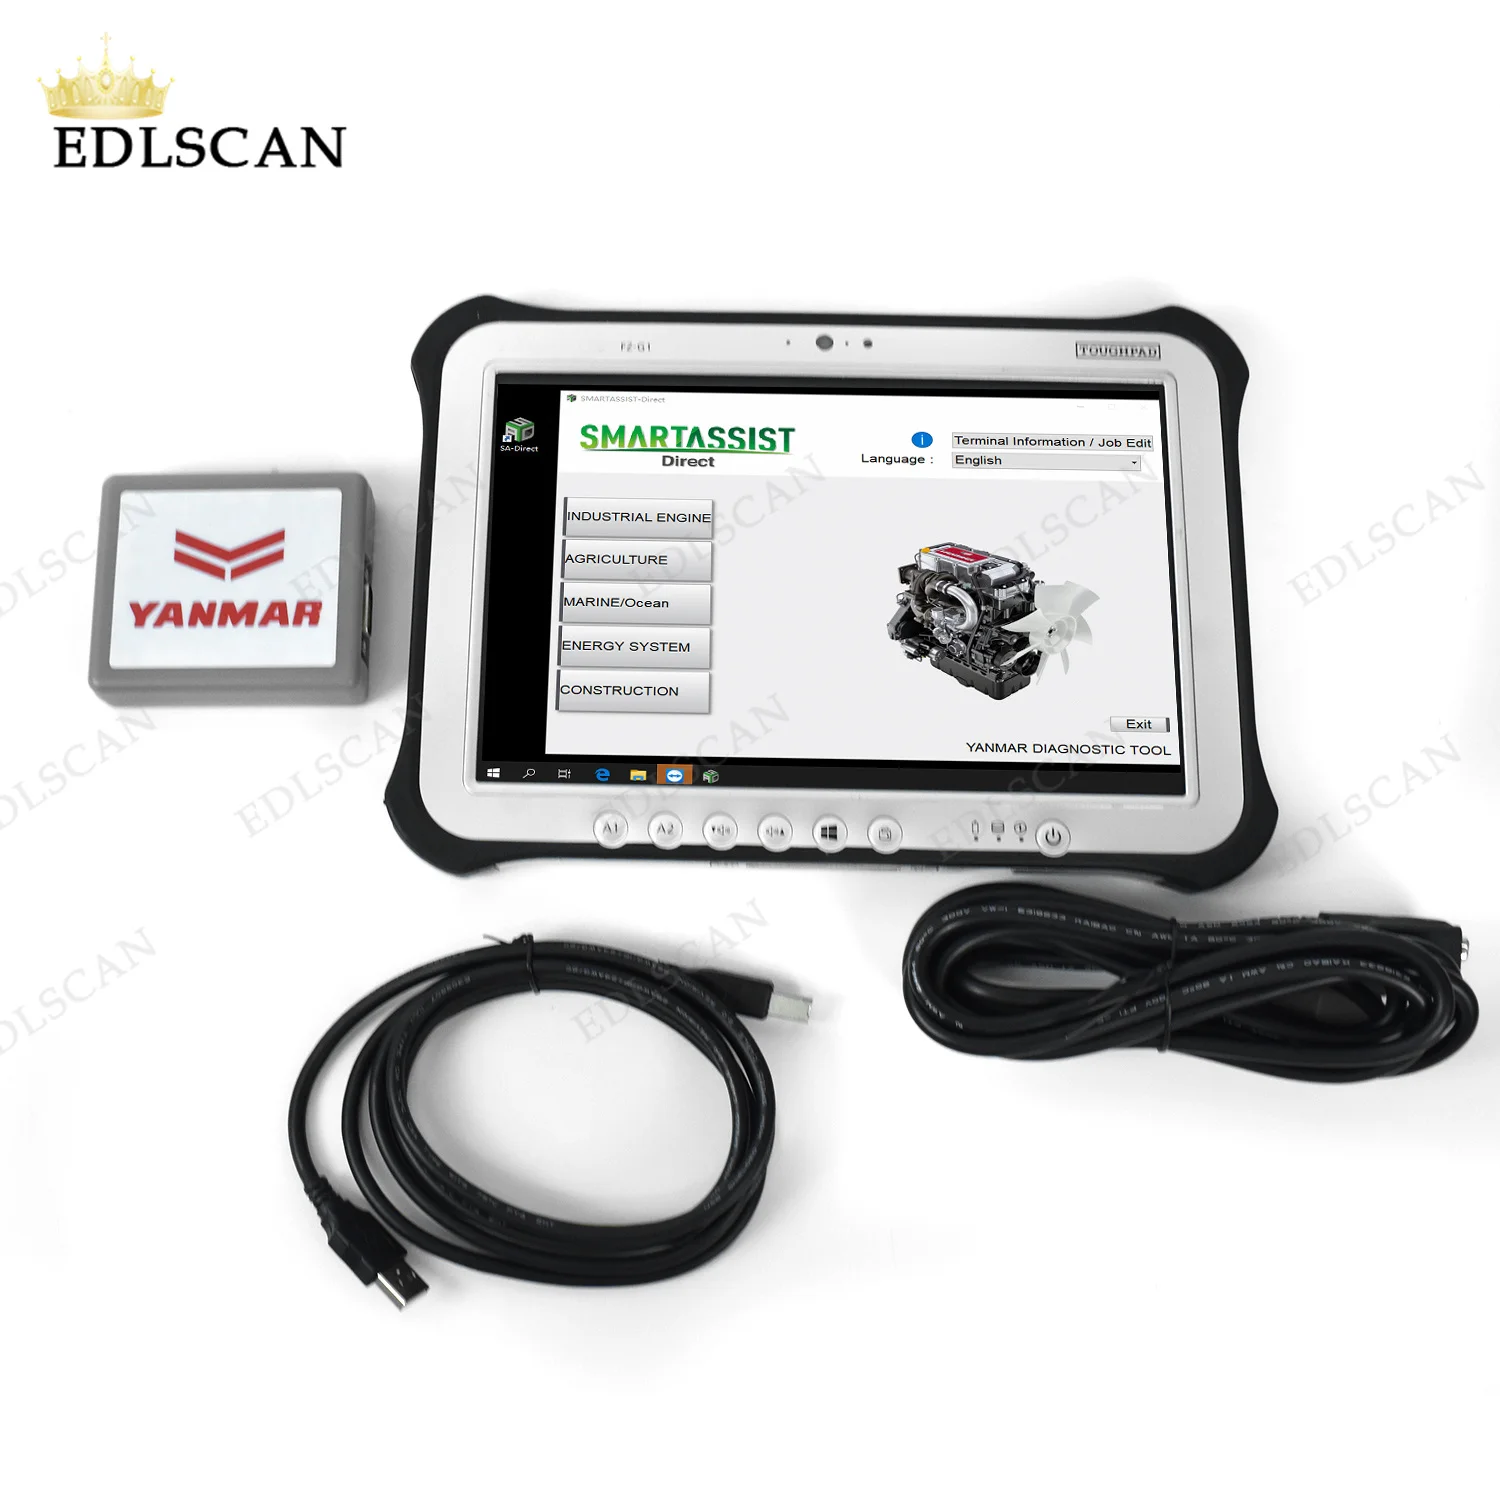 

For Yanmar diagnostic tool Outboard / Jet Boat / Wave Runner,suitable for MERCURY MARINE 225 with FZ-G1 Tablet